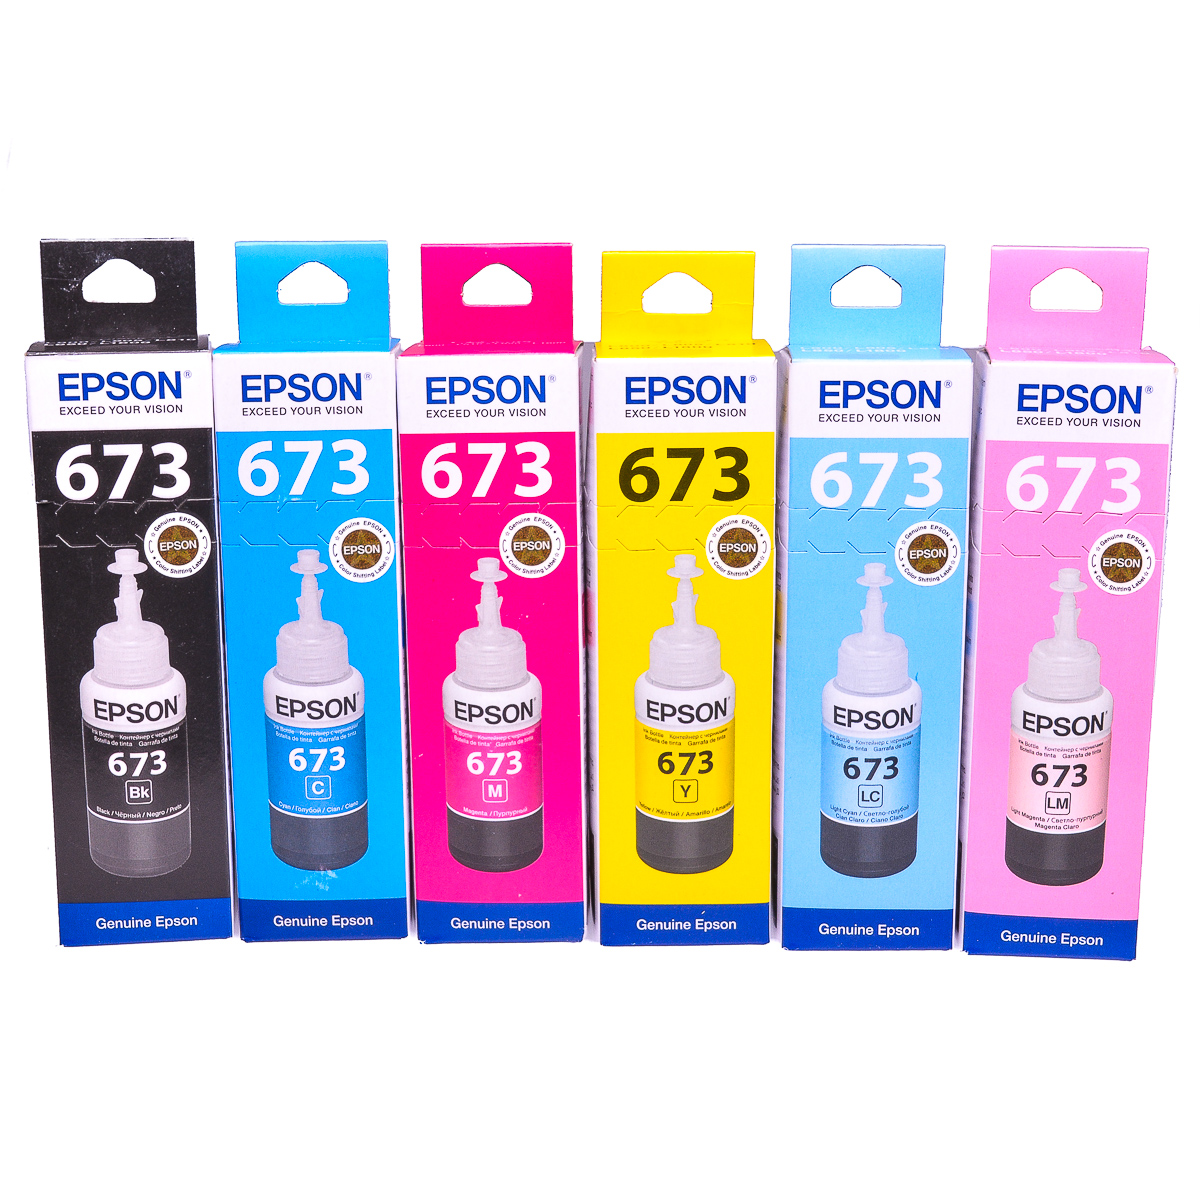 Genuine Multipack ink refill for use with Epson Stylus Photo 1400 printer